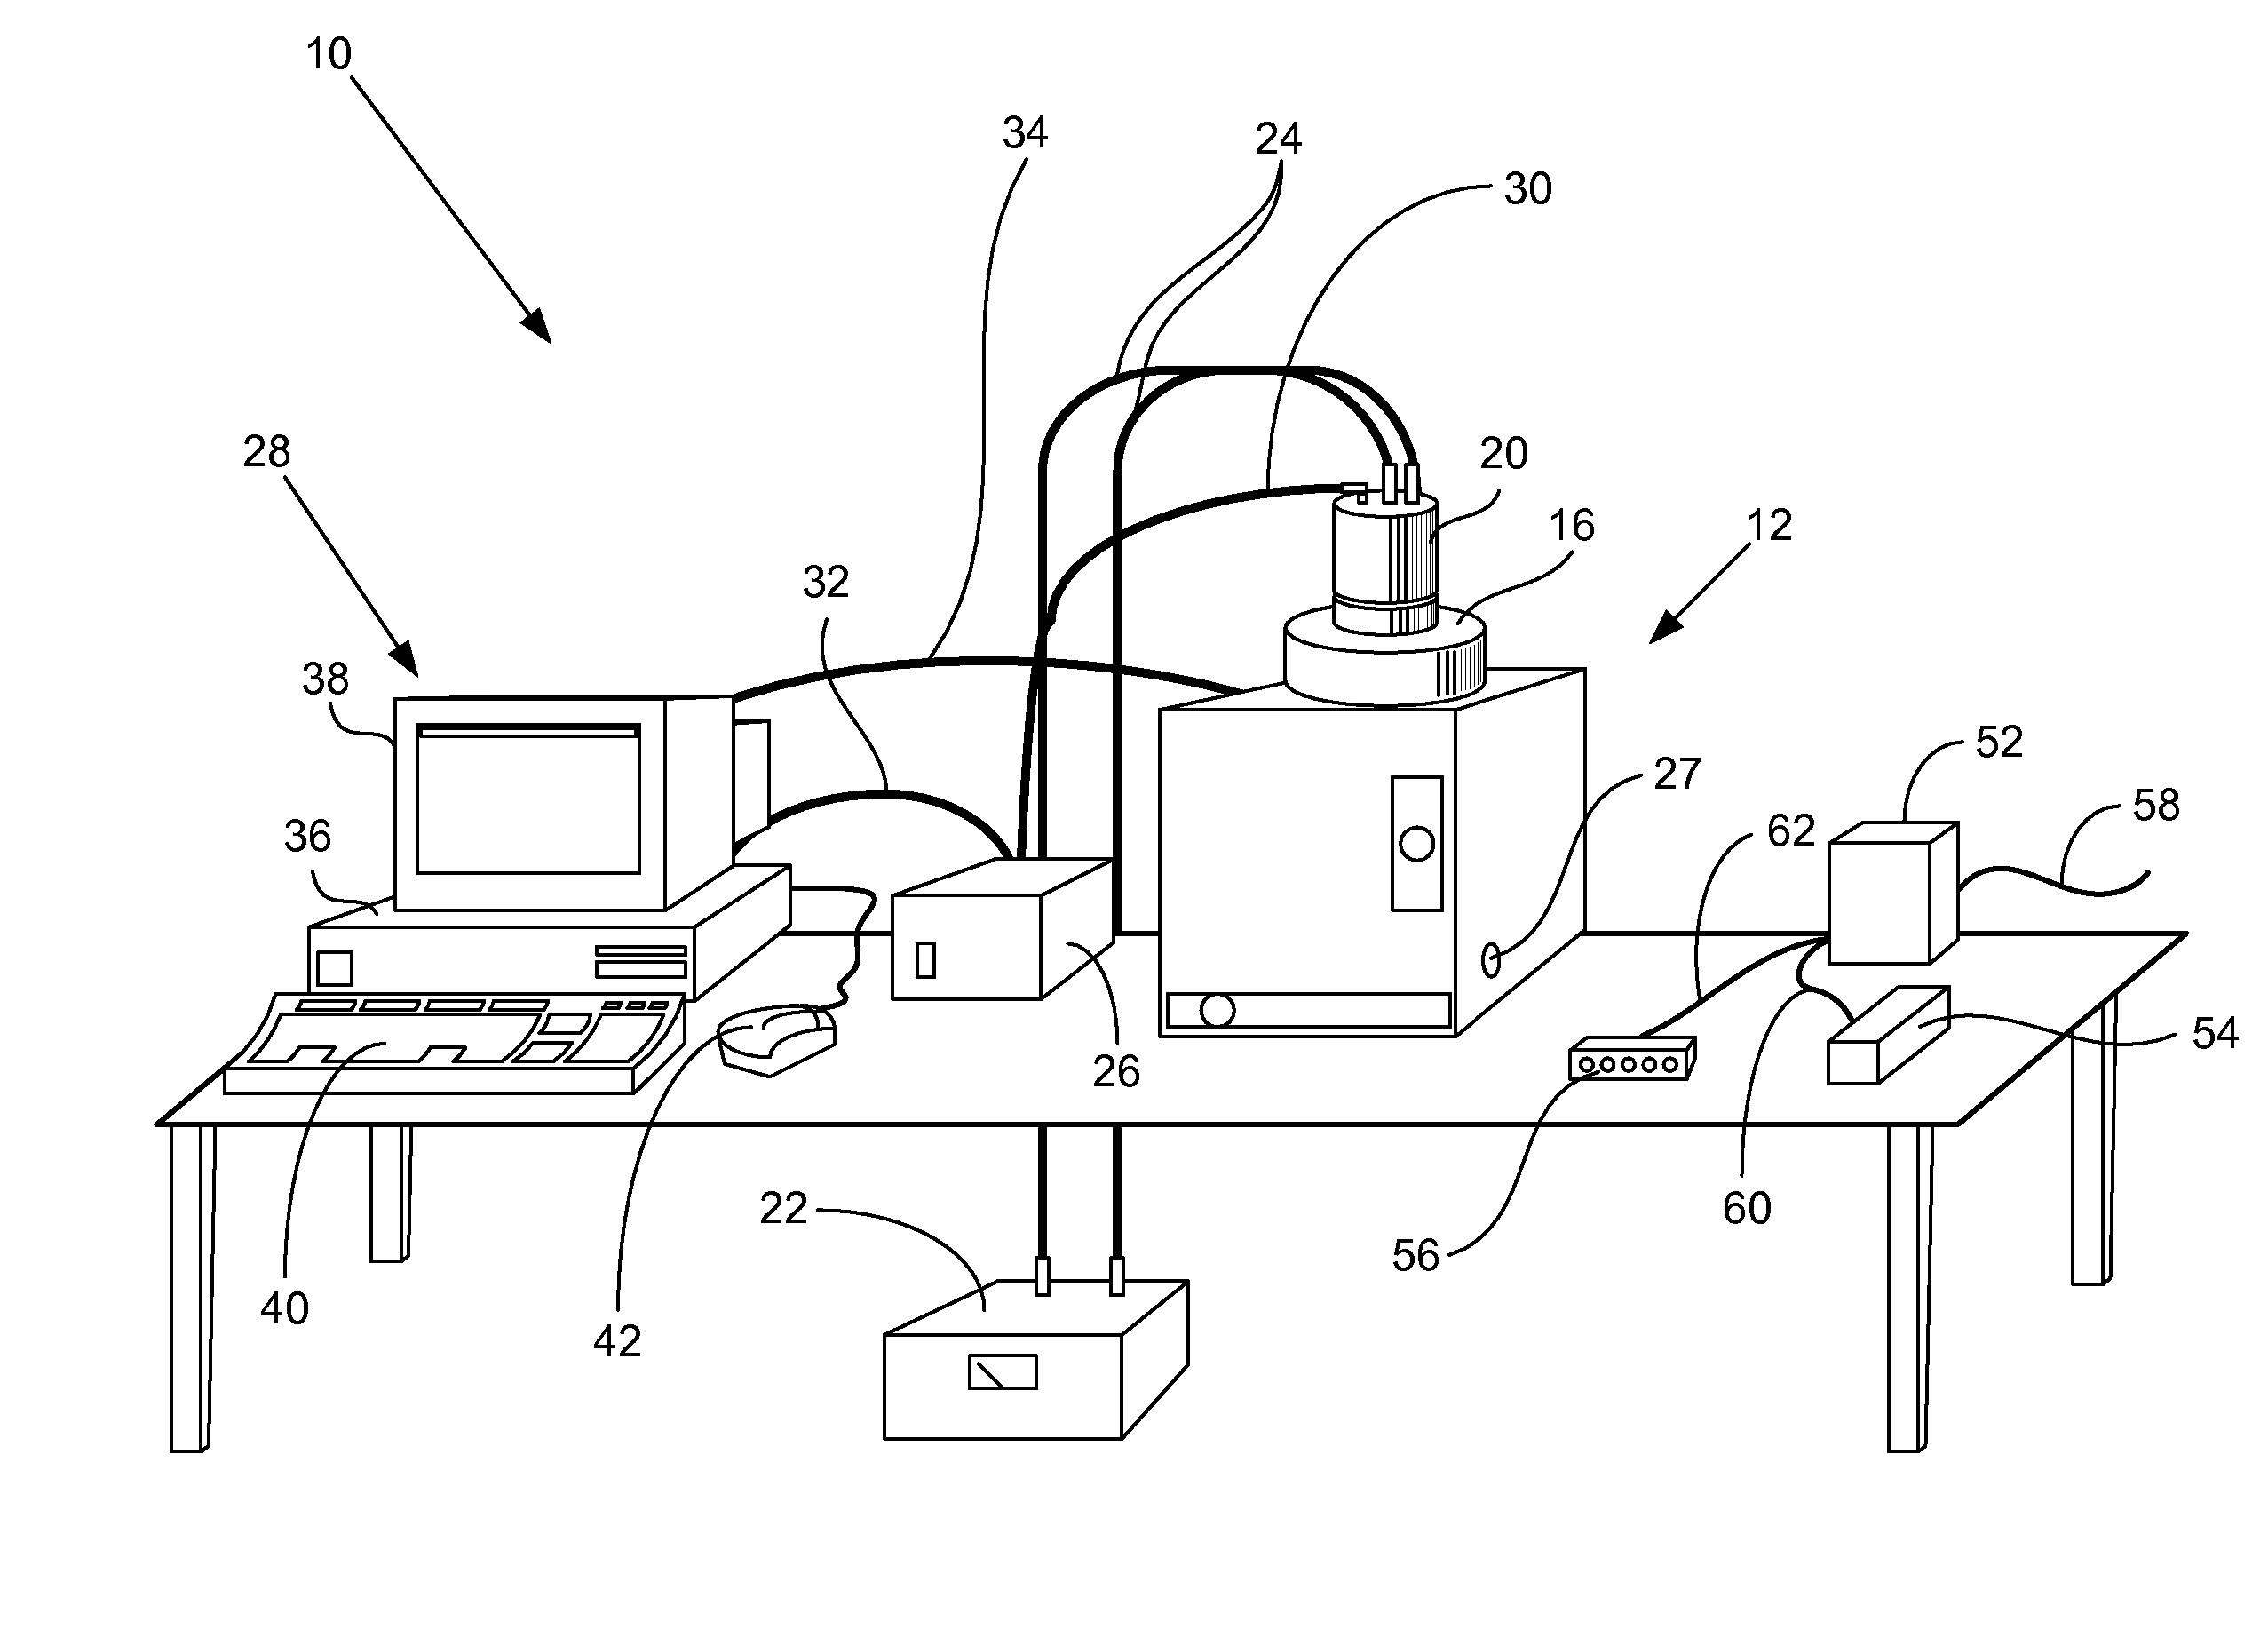 Anesthesia delivery device for use in a light imaging system